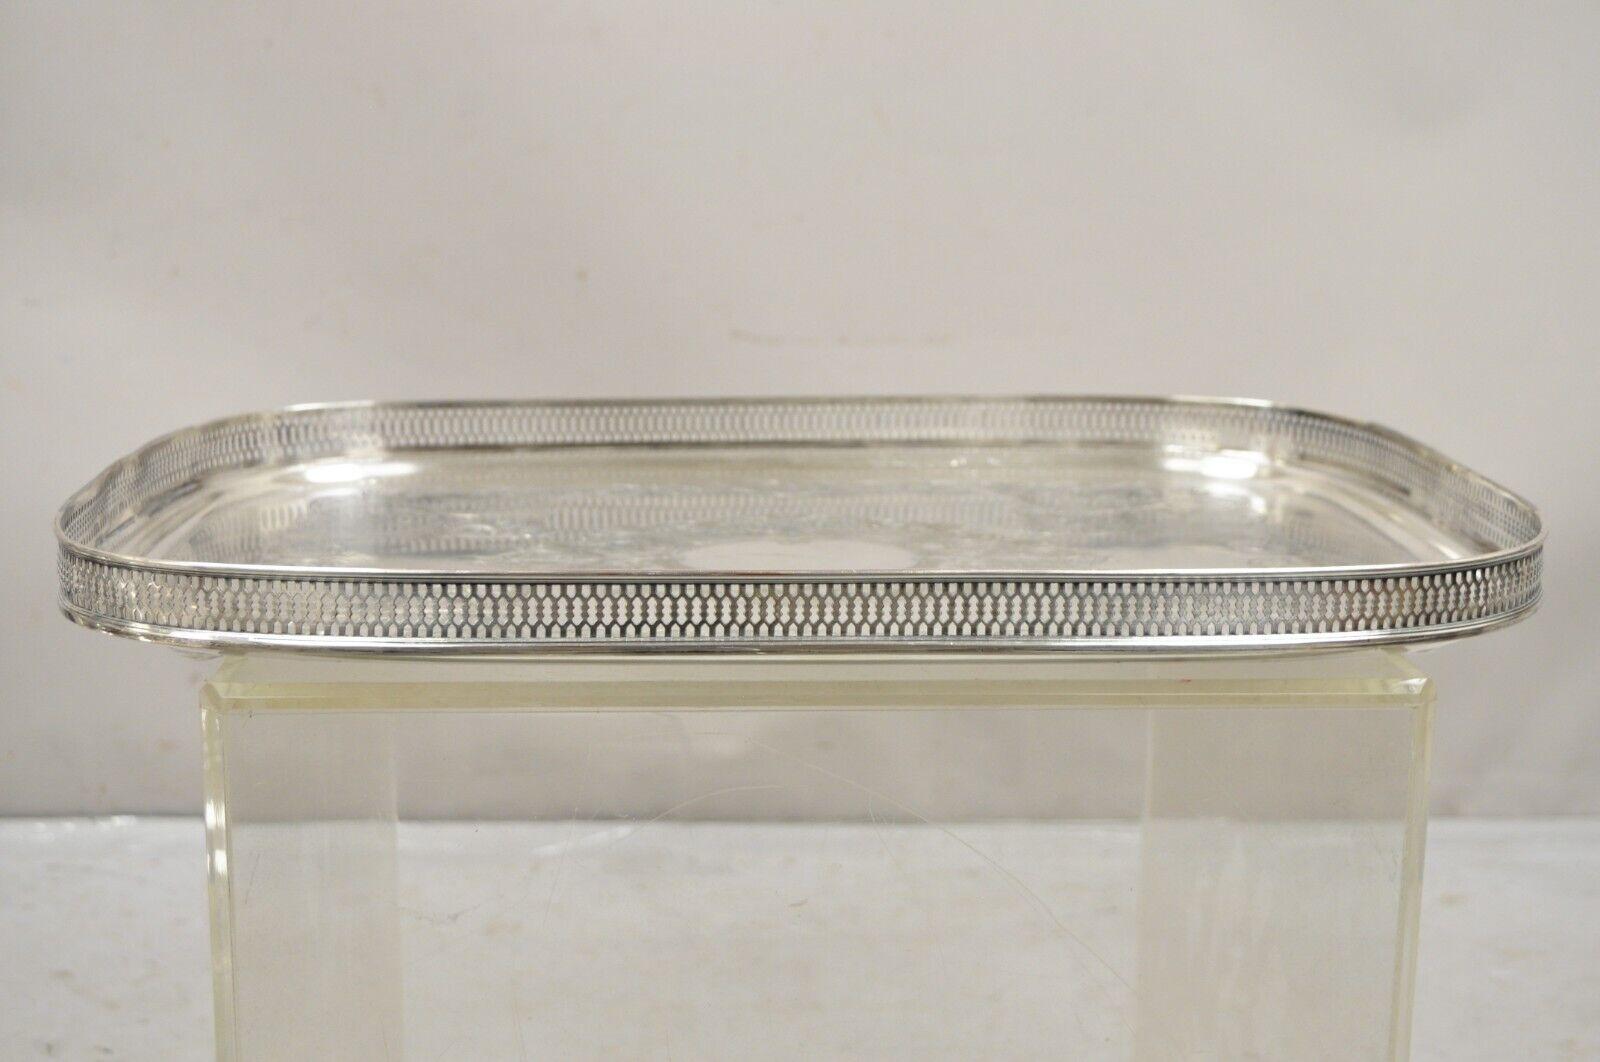 Vintage English Victorian LBS CO Superfine Silver Plated Tray with Gallery. Item features raised pierced gallery, scrolling etch work center, original hallmark, very nice vintage item. Circa Mid 20th Century. Measurements:  1.5